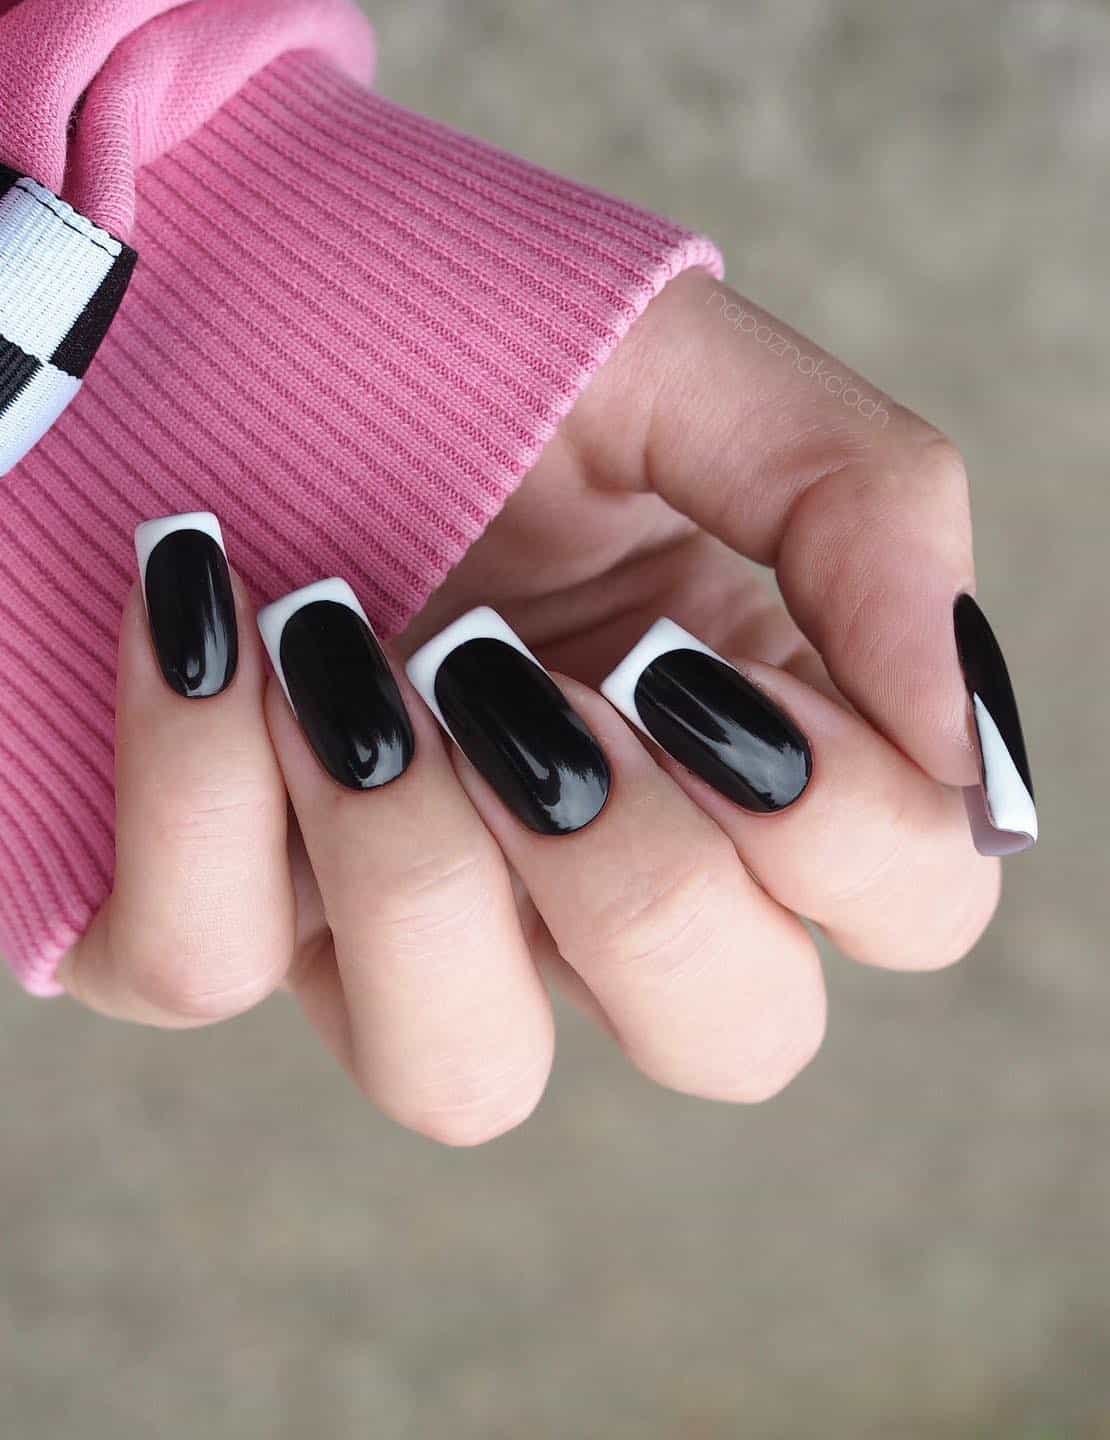 Medium square nails with glossy black polish and white French tips